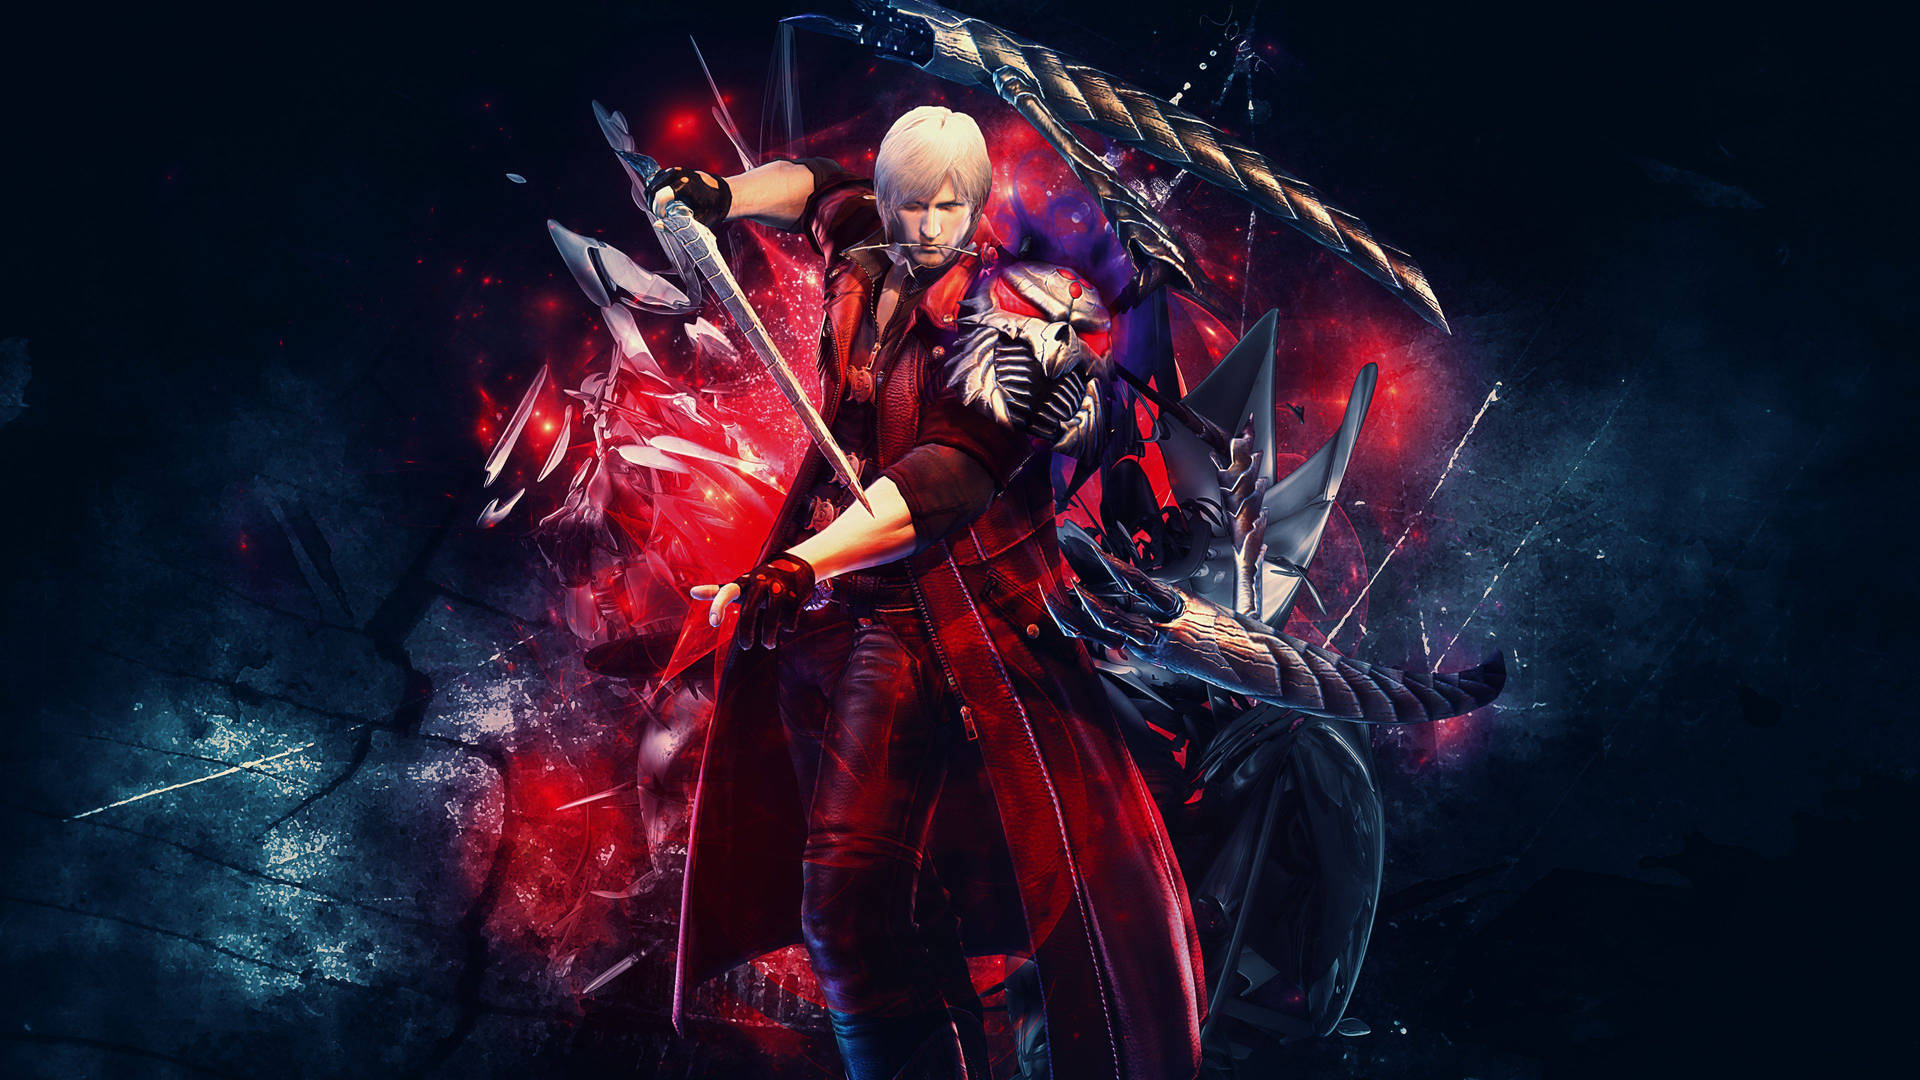 Dante from Devil May Cry takes a battle stance with his sword. Wallpaper